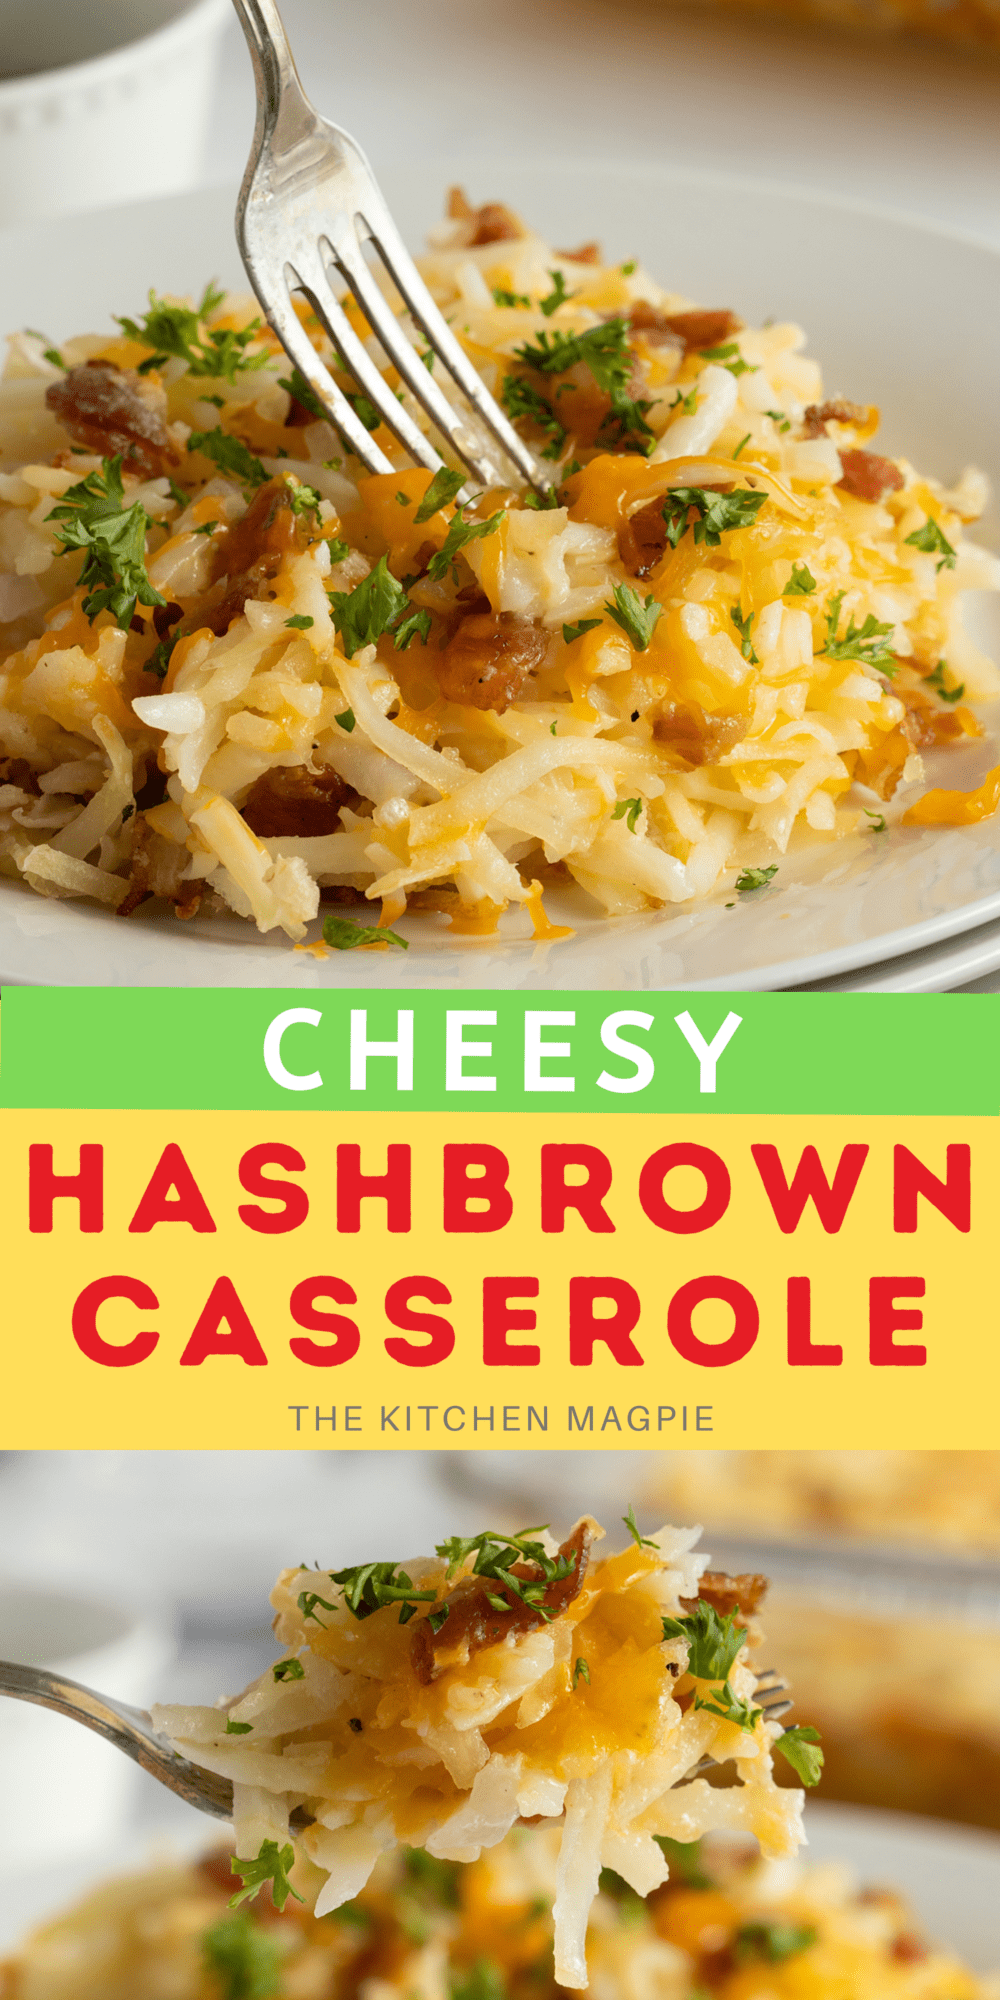 This cheesy, bacony, and super delicious hash brown casserole works great both as a breakfast side dish and as its own meal.